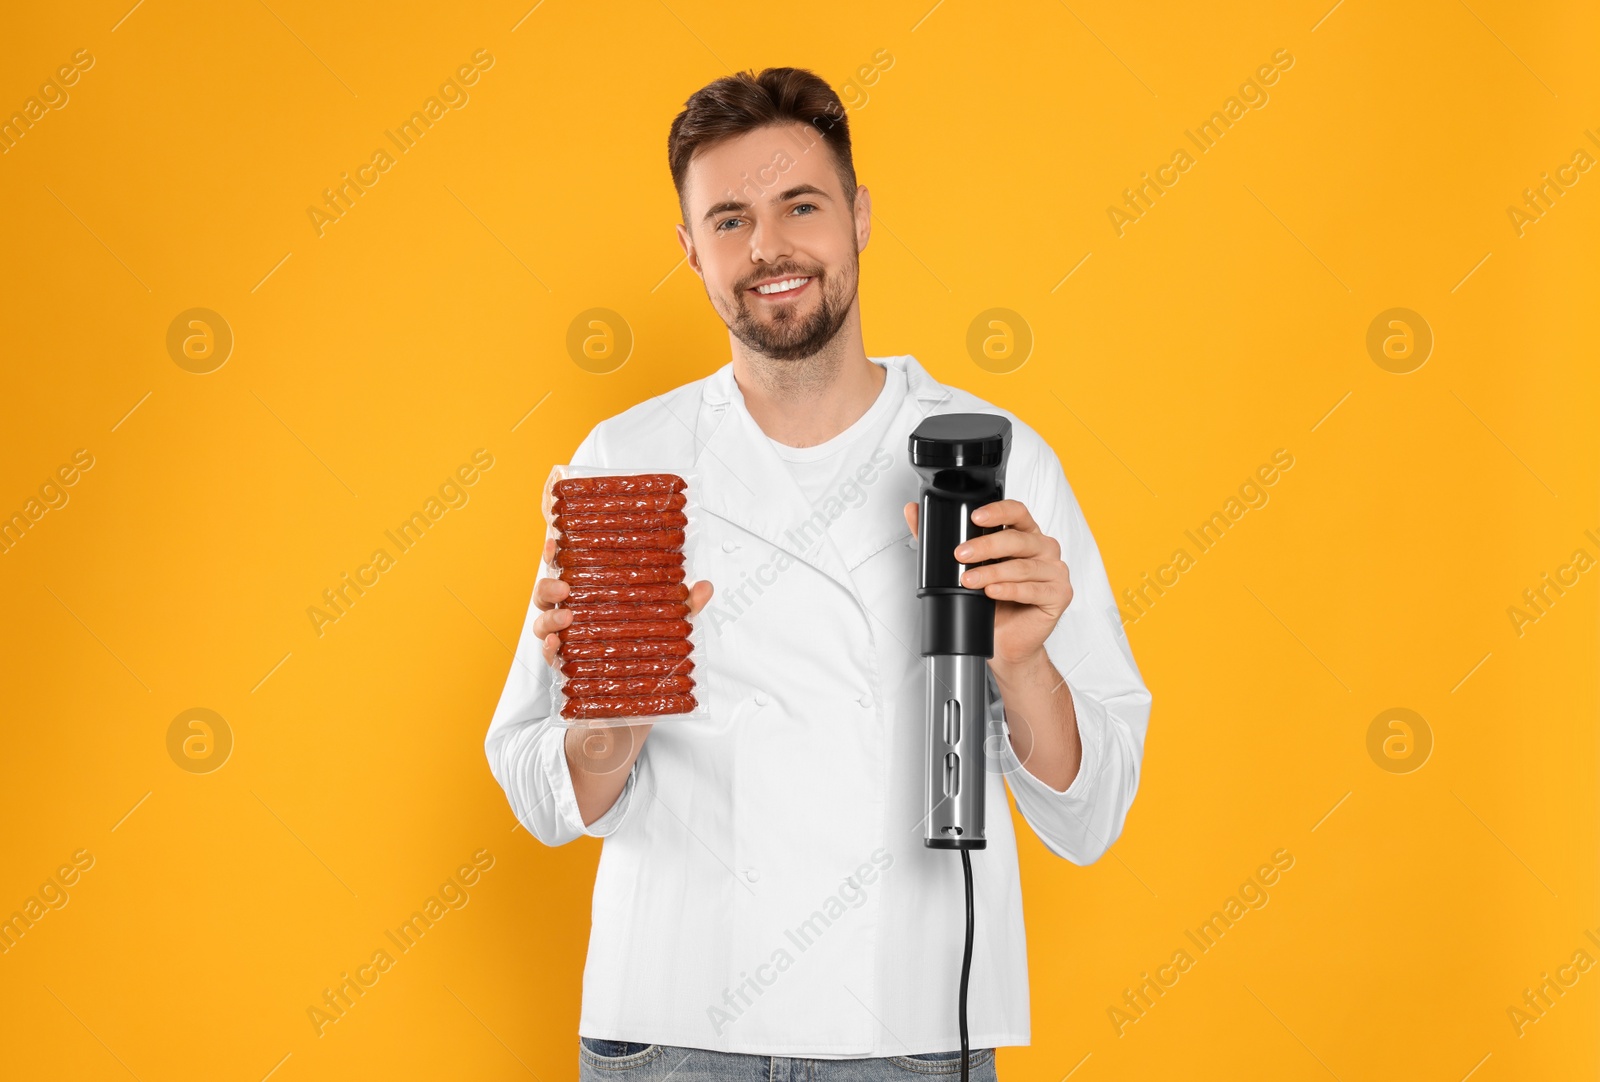 Photo of Smiling chef holding sous vide cooker and sausages in vacuum pack on orange background